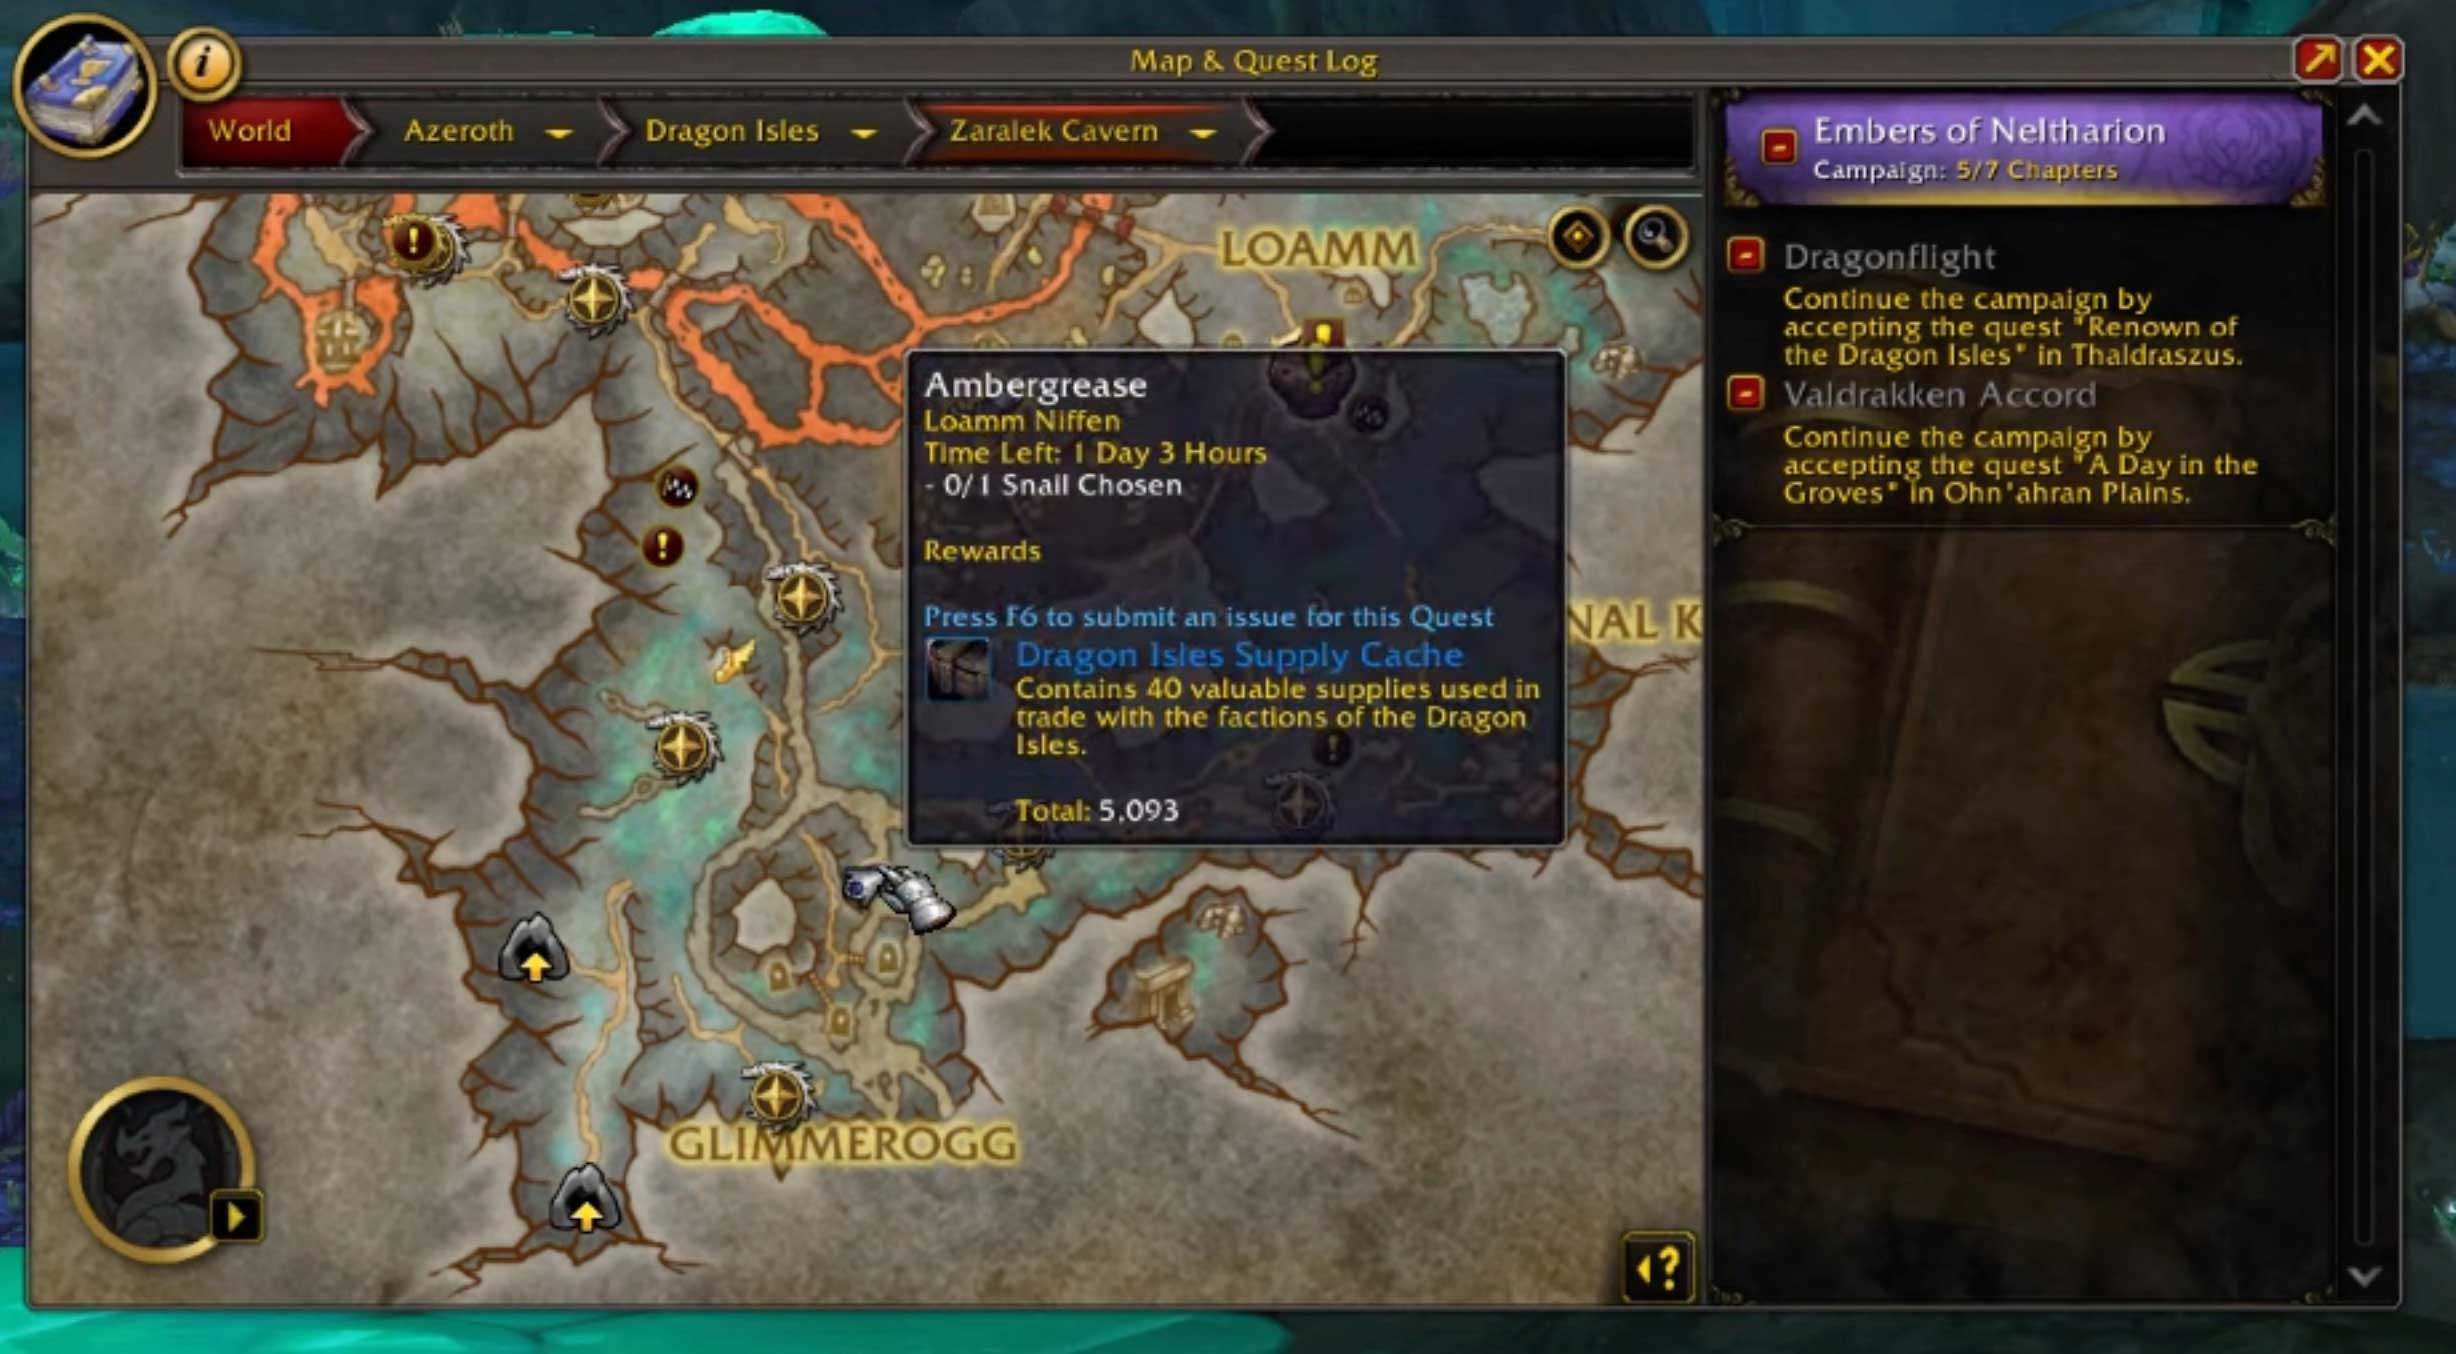 How to Complete Ambergrease Quest in WoW Dragonflight